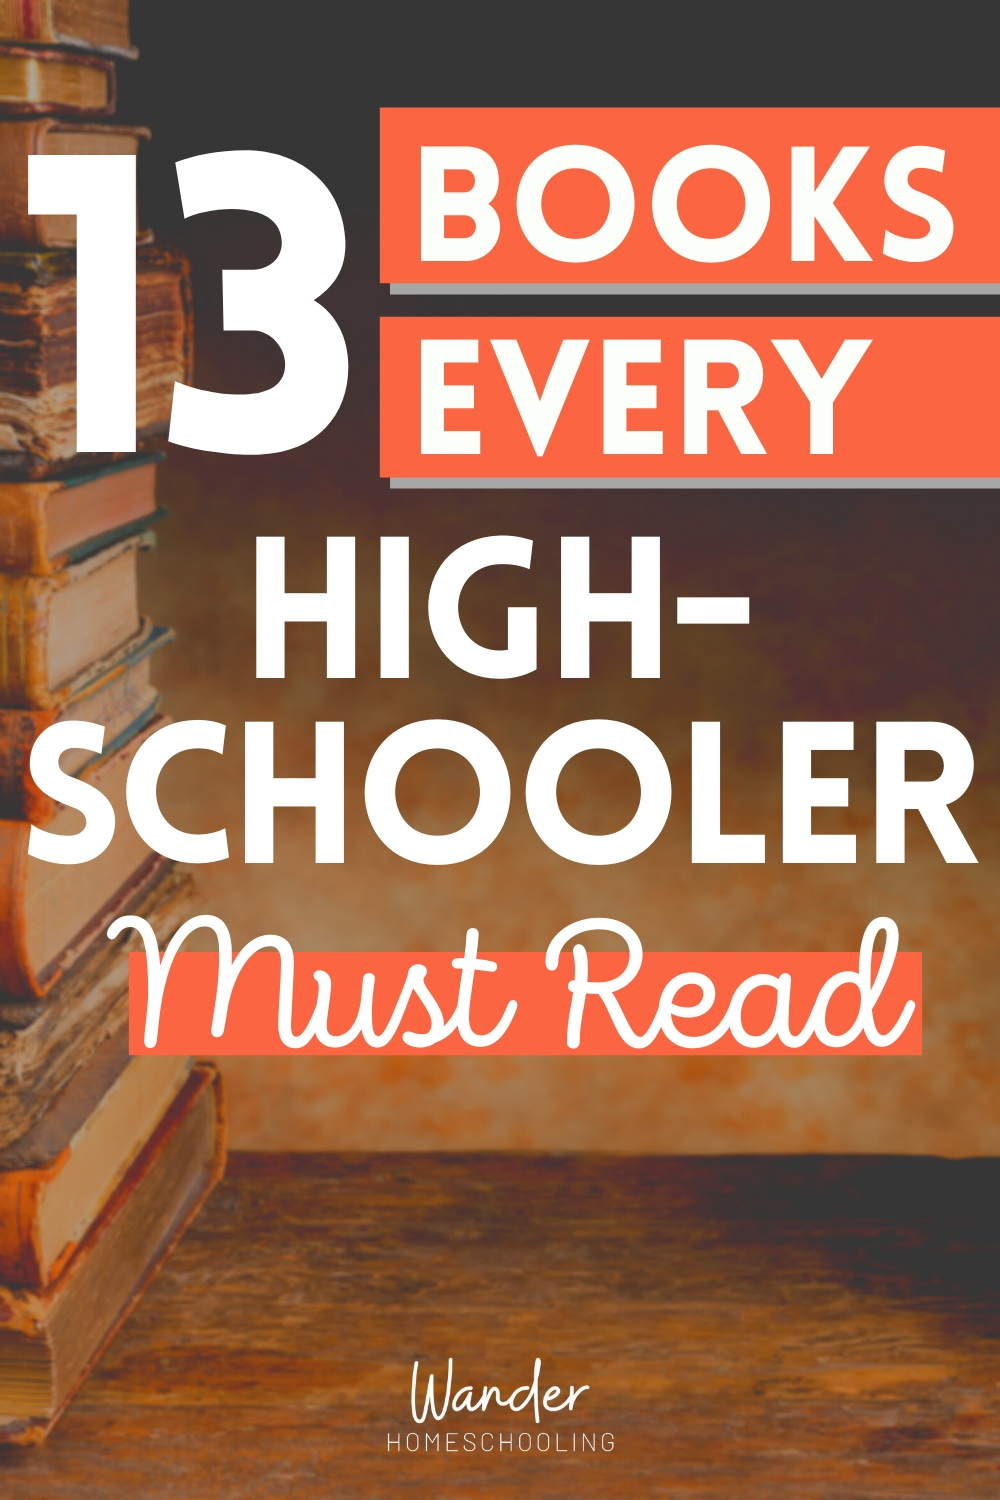 books every high schooler should read